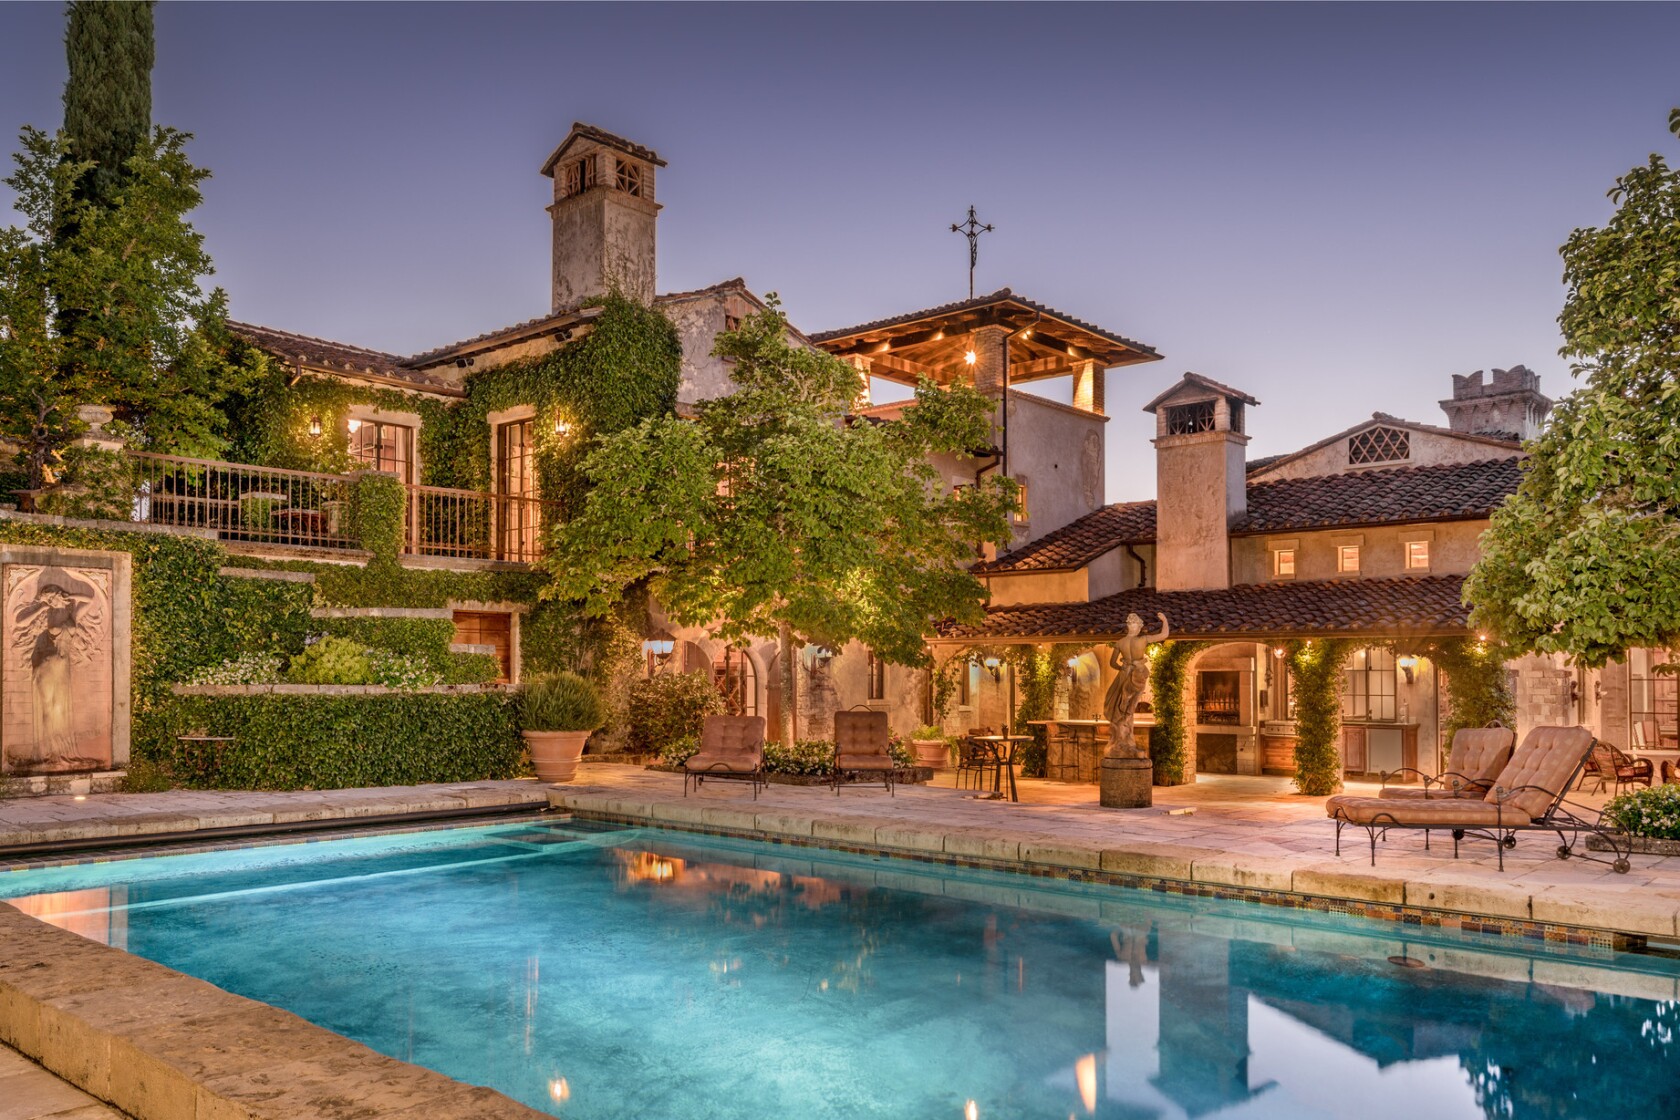 Joe Montana’s 500-acre ranch relists for $20 million less in Calistoga ...